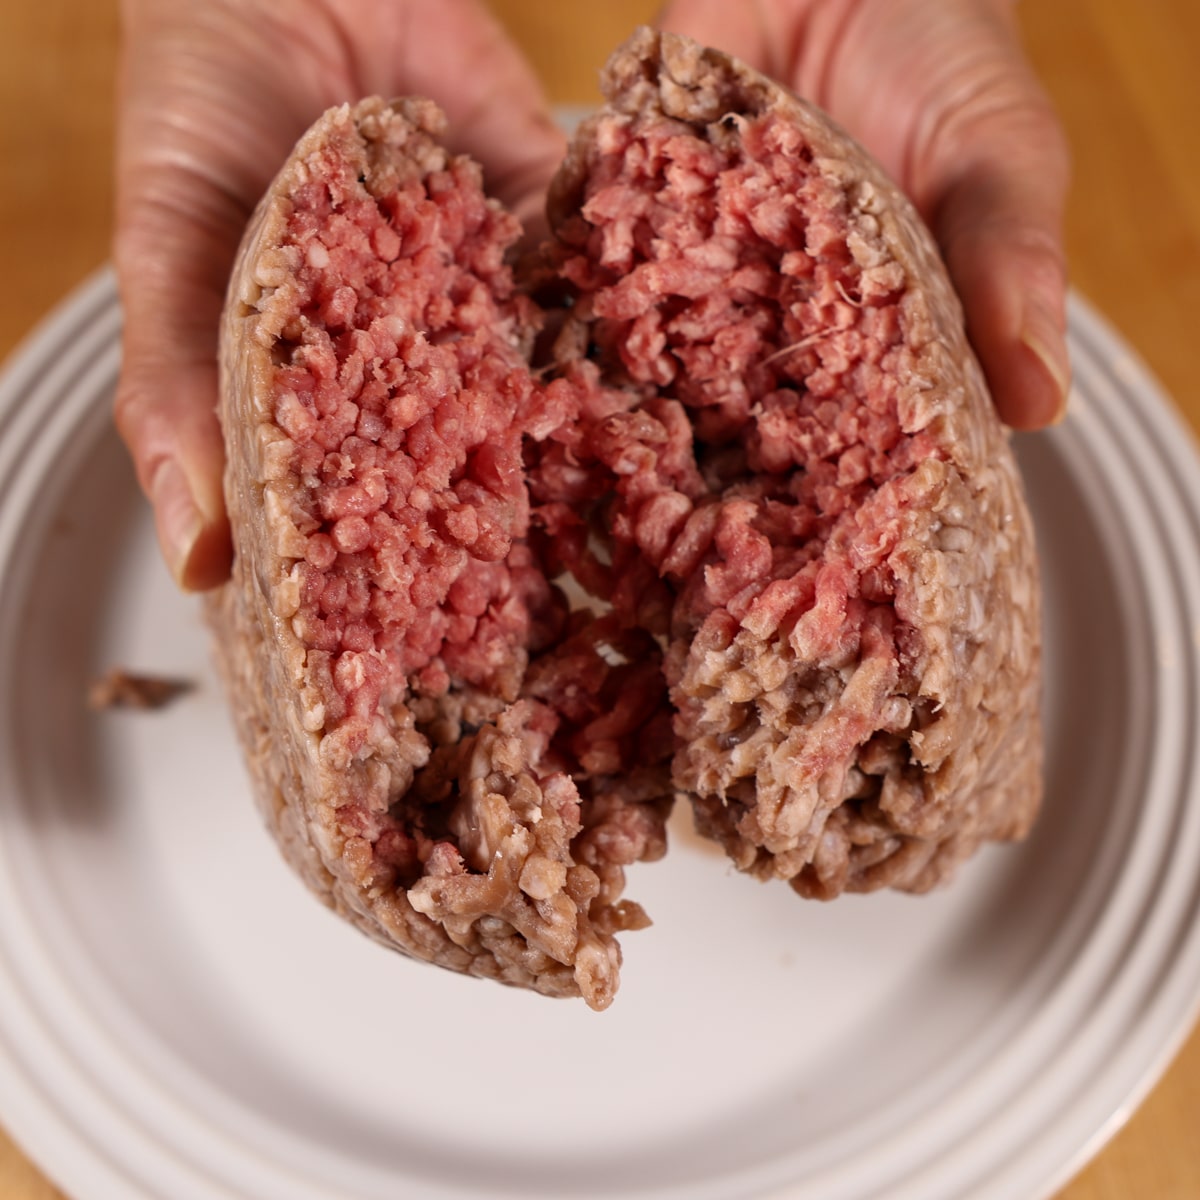 How to tell if ground beef is bad - 3 Easy Tests